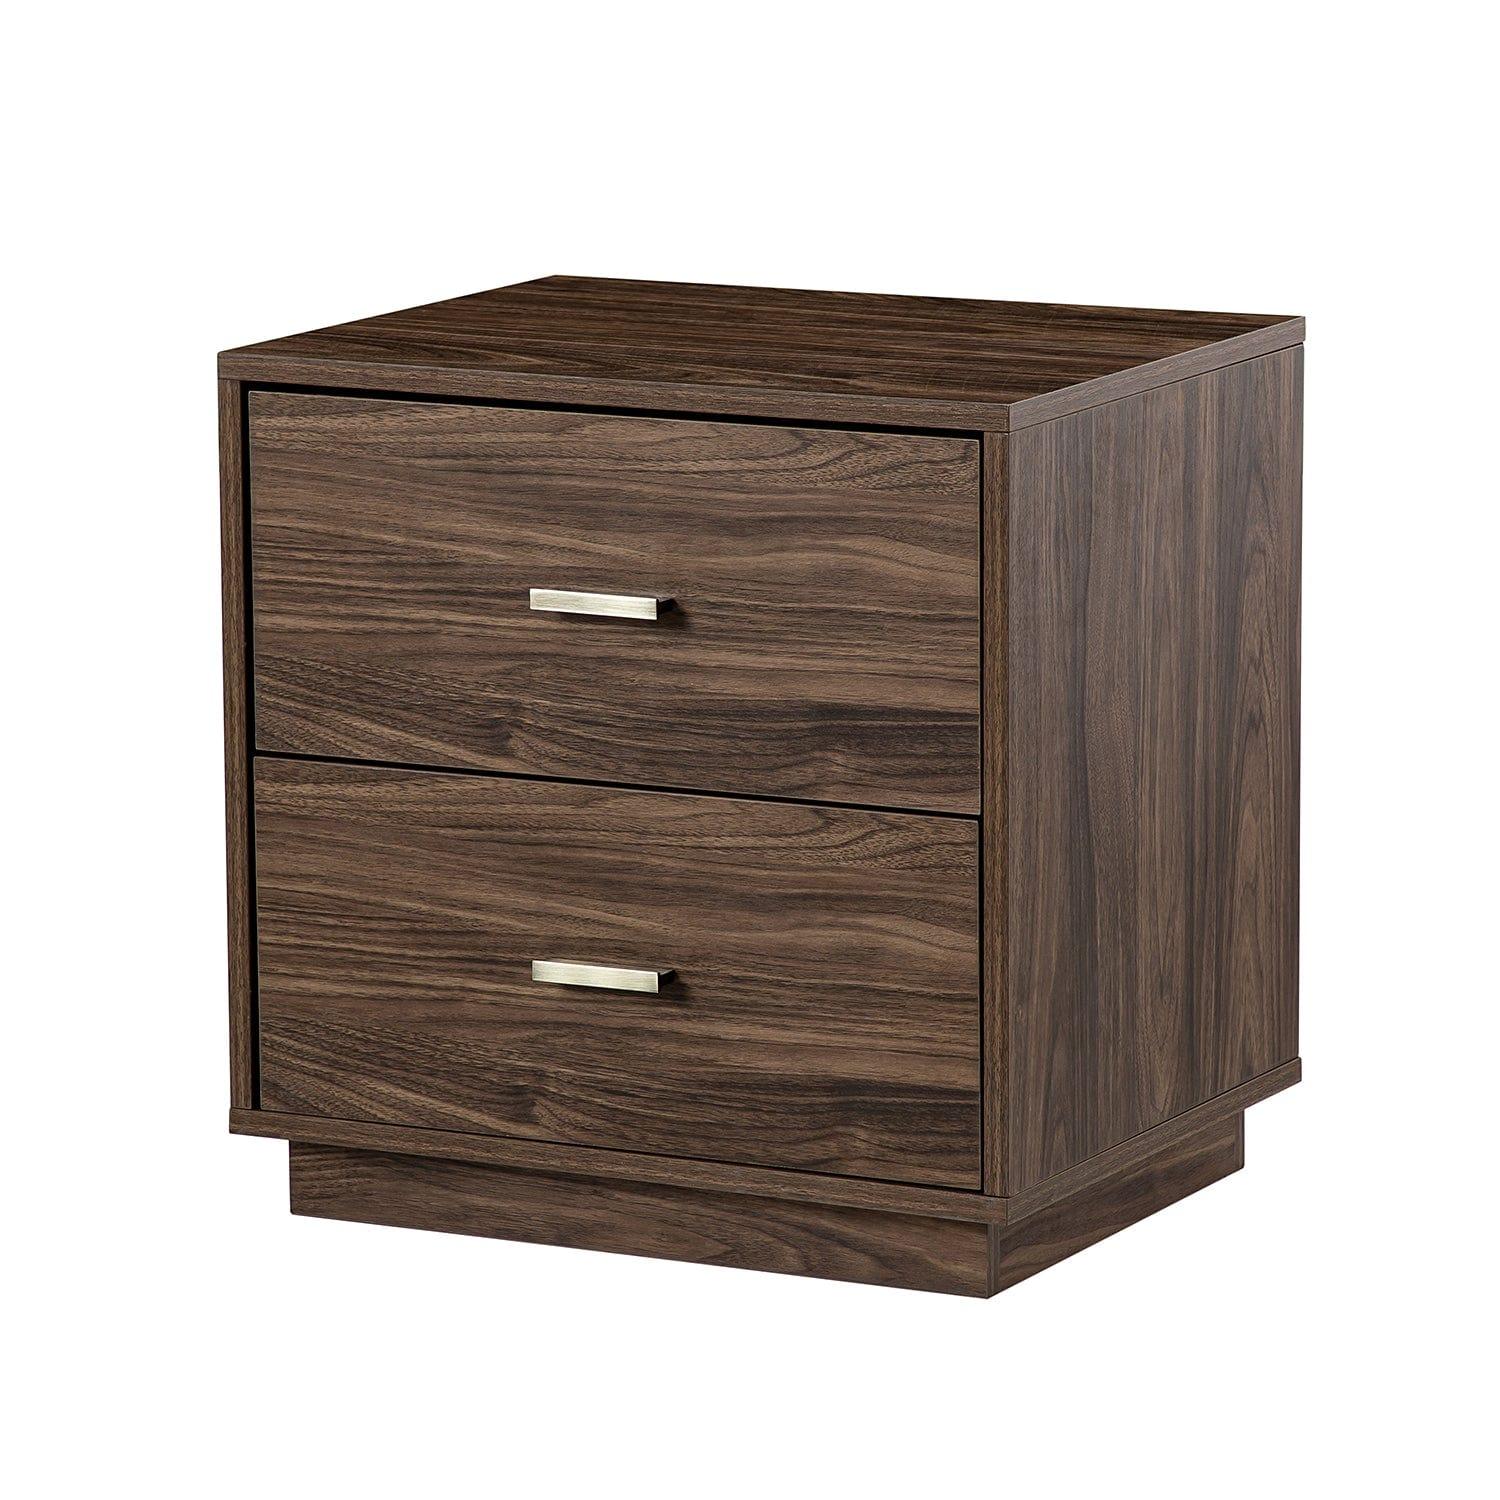 Shop Phthia 2-Drawer End table with Storage Mademoiselle Home Decor